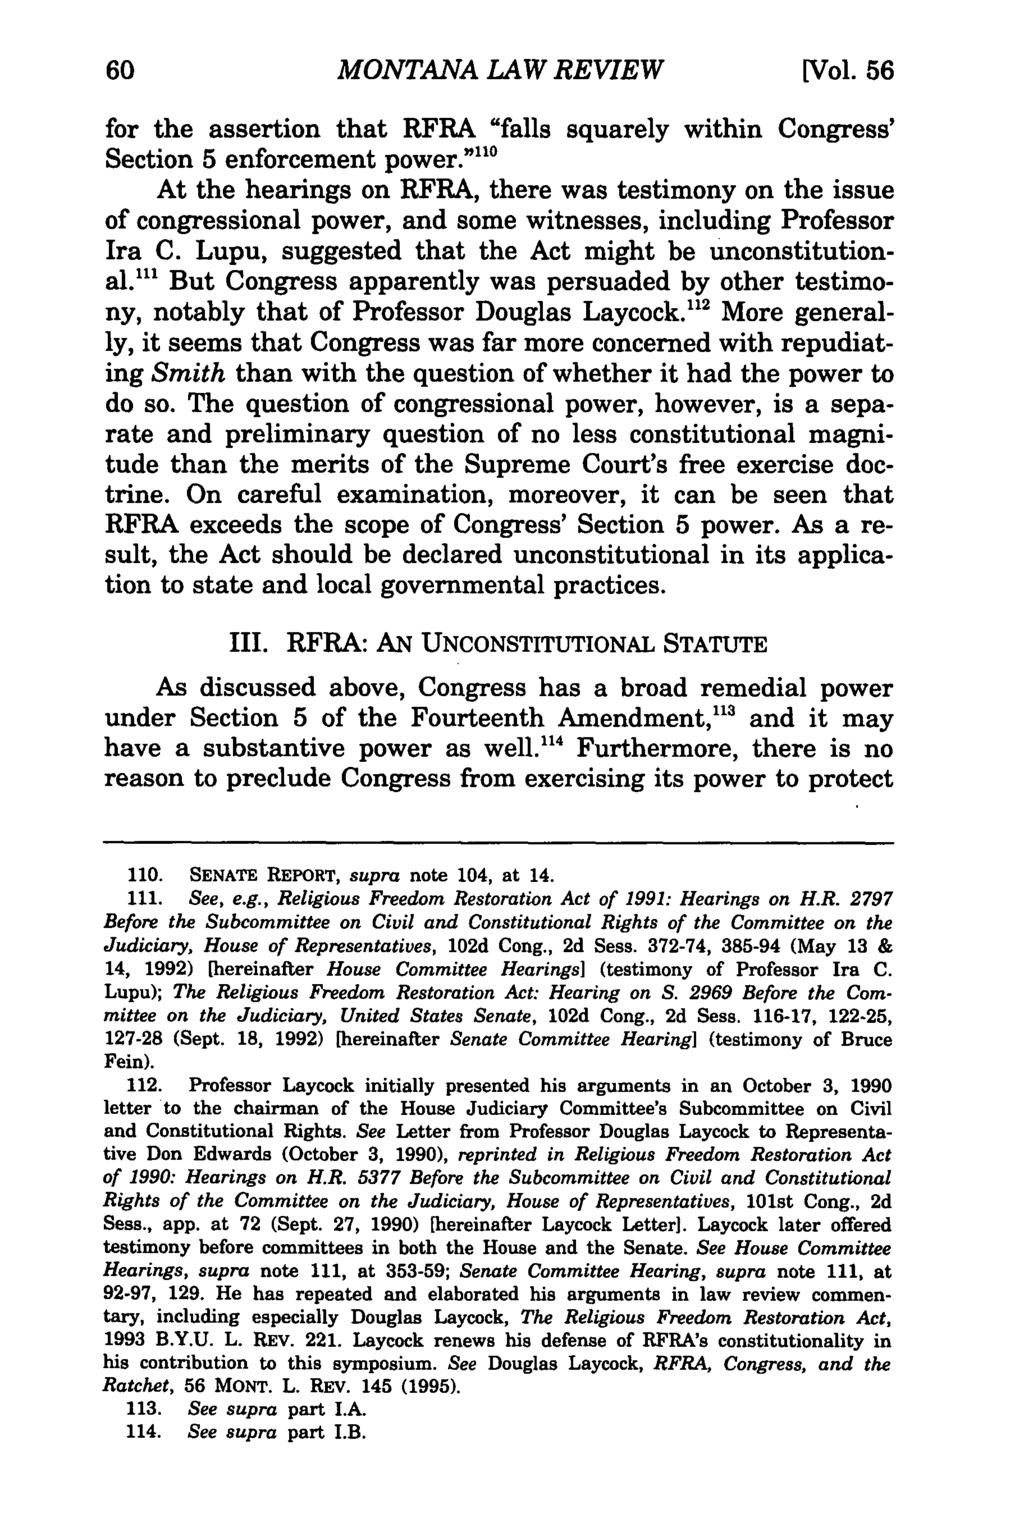 Montana Law Review, Vol. 56 [1995], Iss. 1, Art. 3 MONTANA LAW REVIEW [Vol. 56 for the assertion that RFRA "falls squarely within Congress' Section 5 enforcement power.